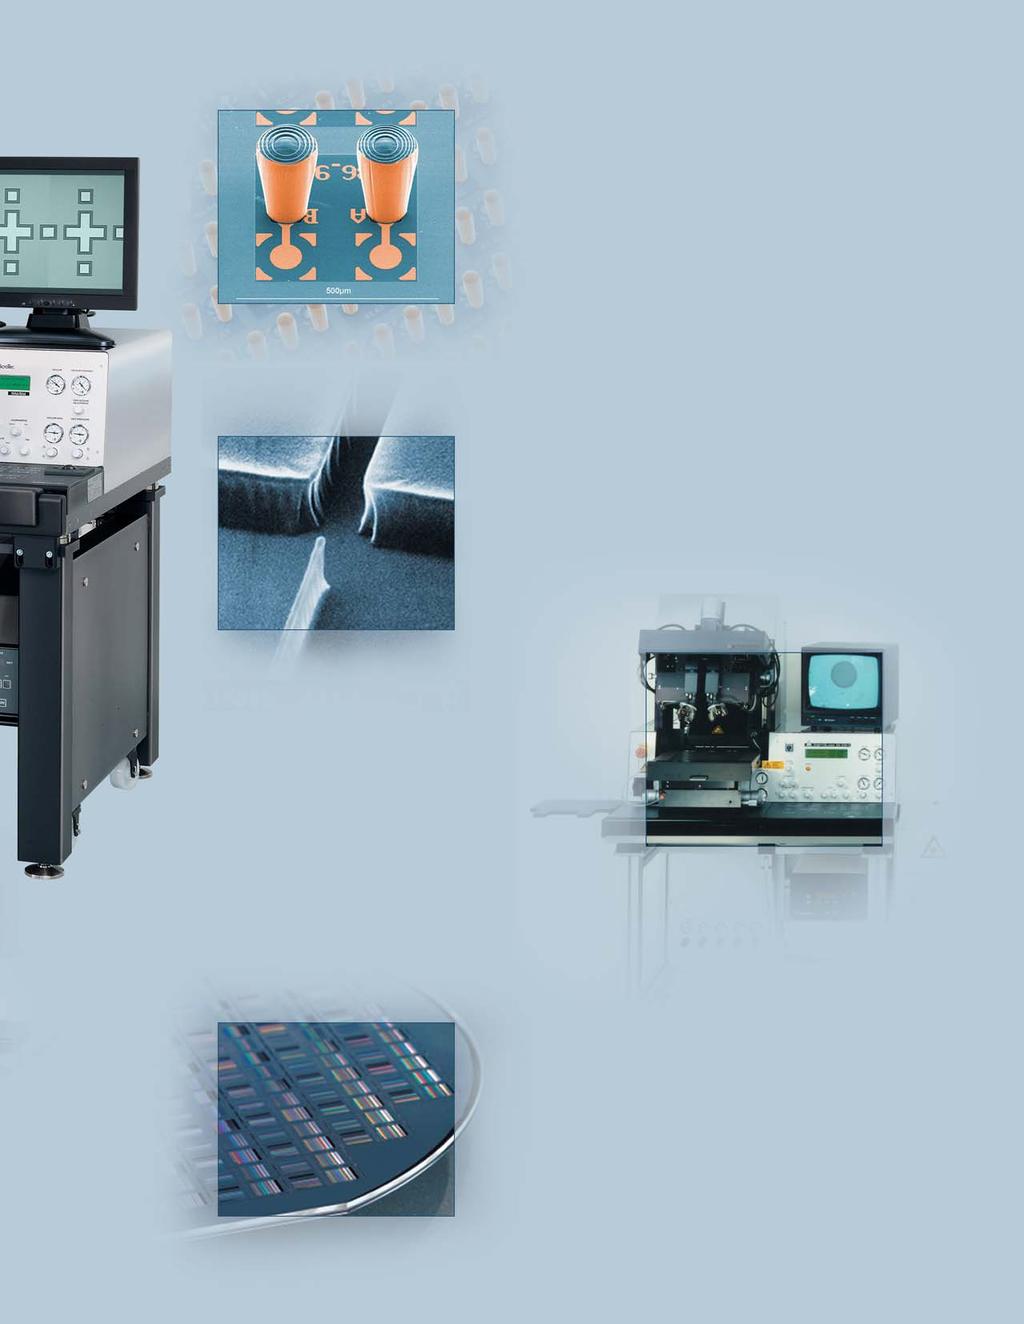 UV Embossing or Imprint Lithography For aligned single- or multi-layer wafer level cold embossing the MA6 Mask Aligner was designed to produce optimal results for single or double sided embossing of